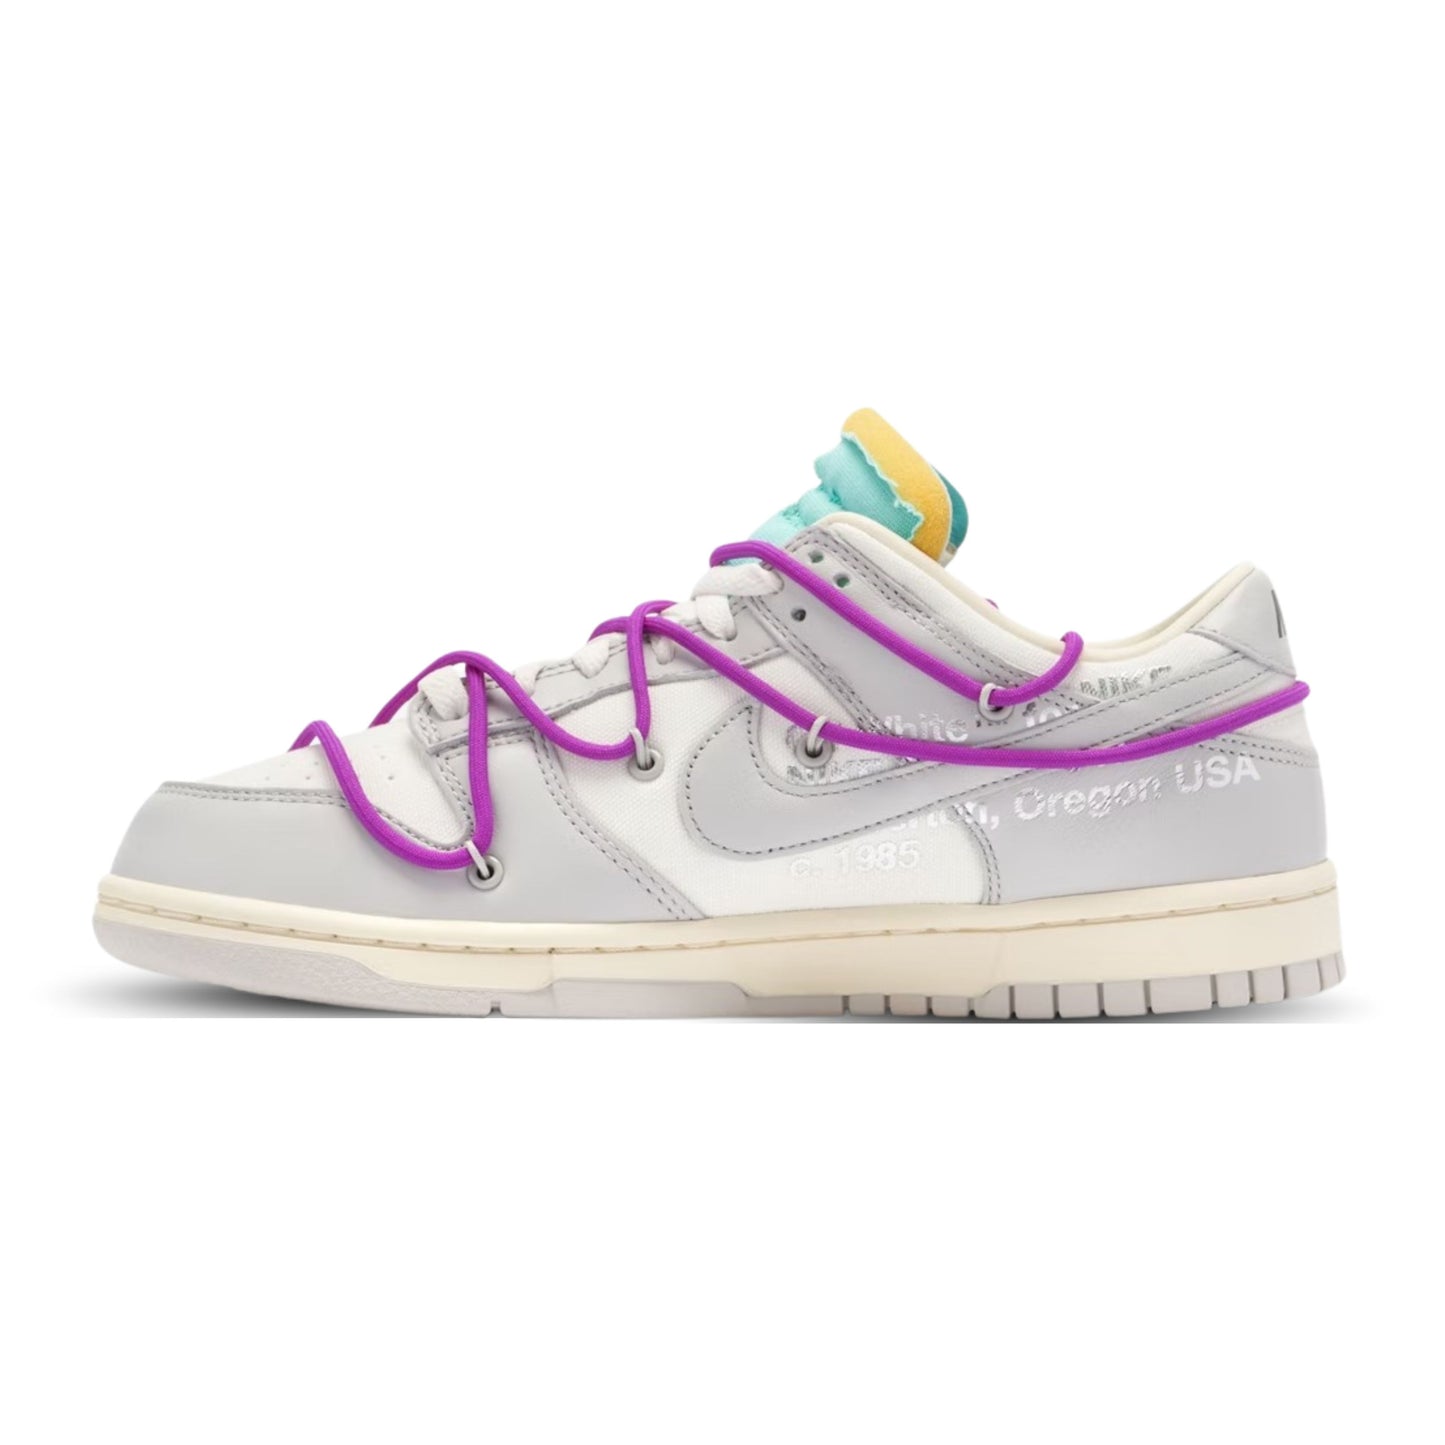 Nike Dunk Low x Off-White - Lot 21 of 50